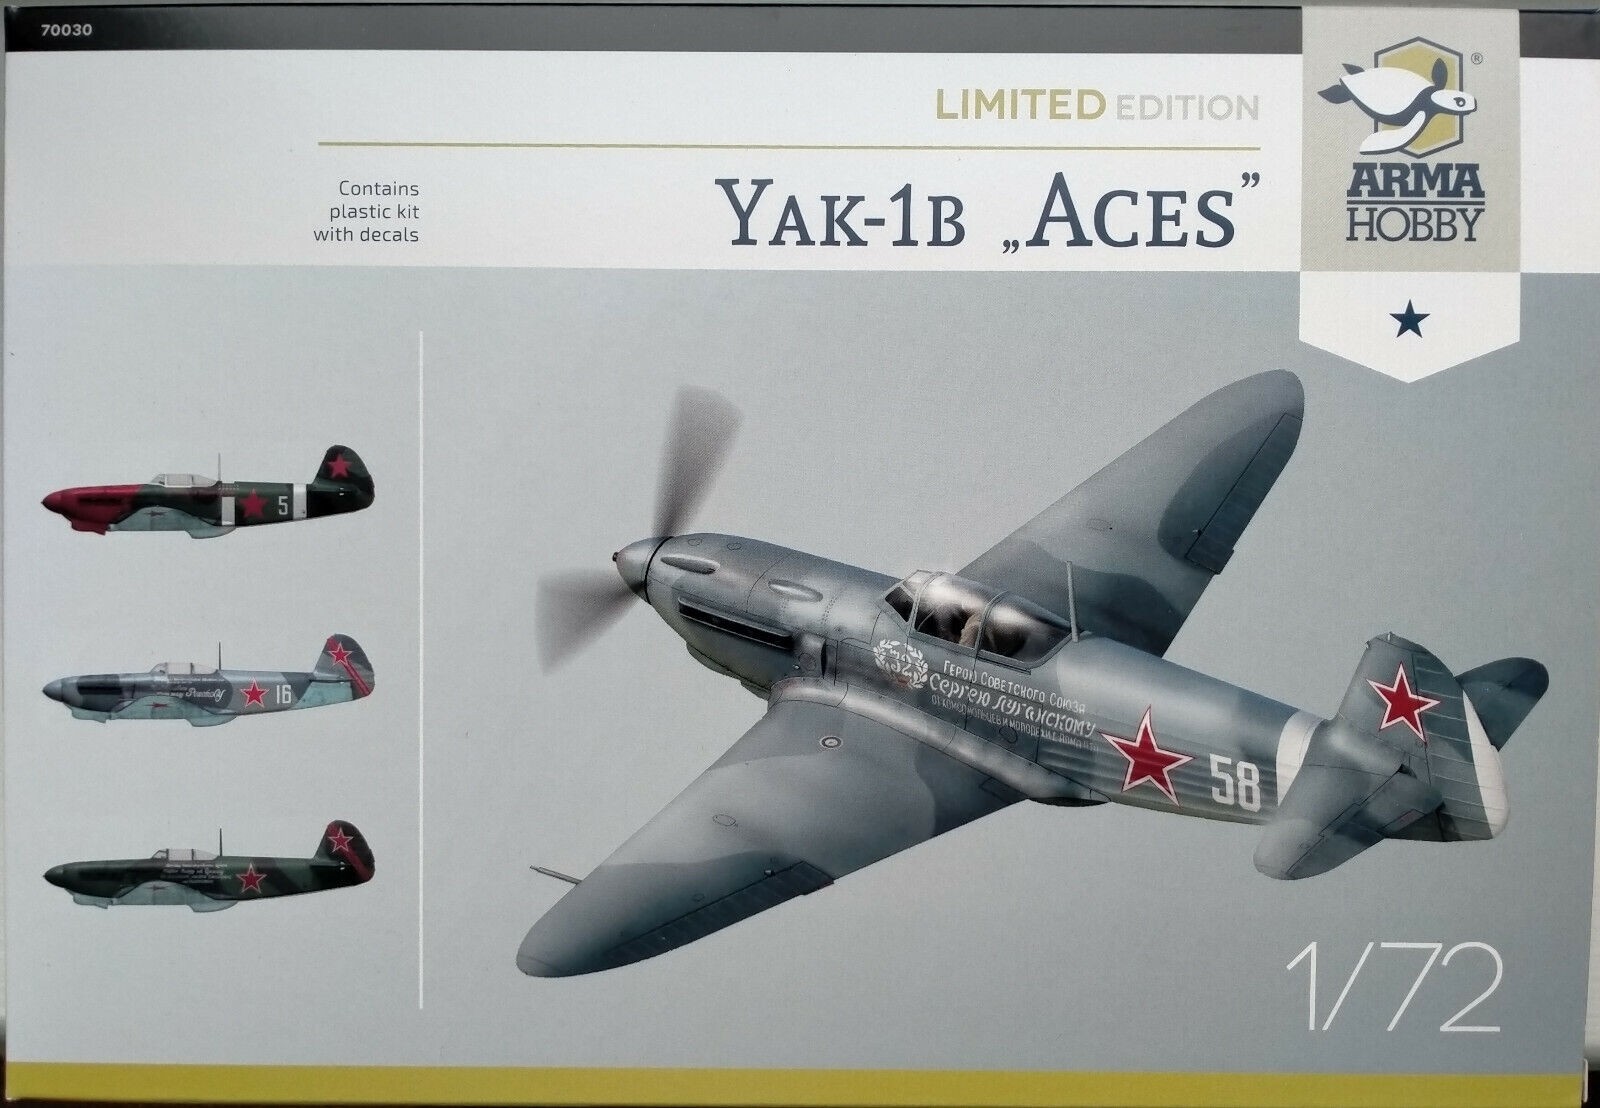 Yak-1b Aces - Limited Edition